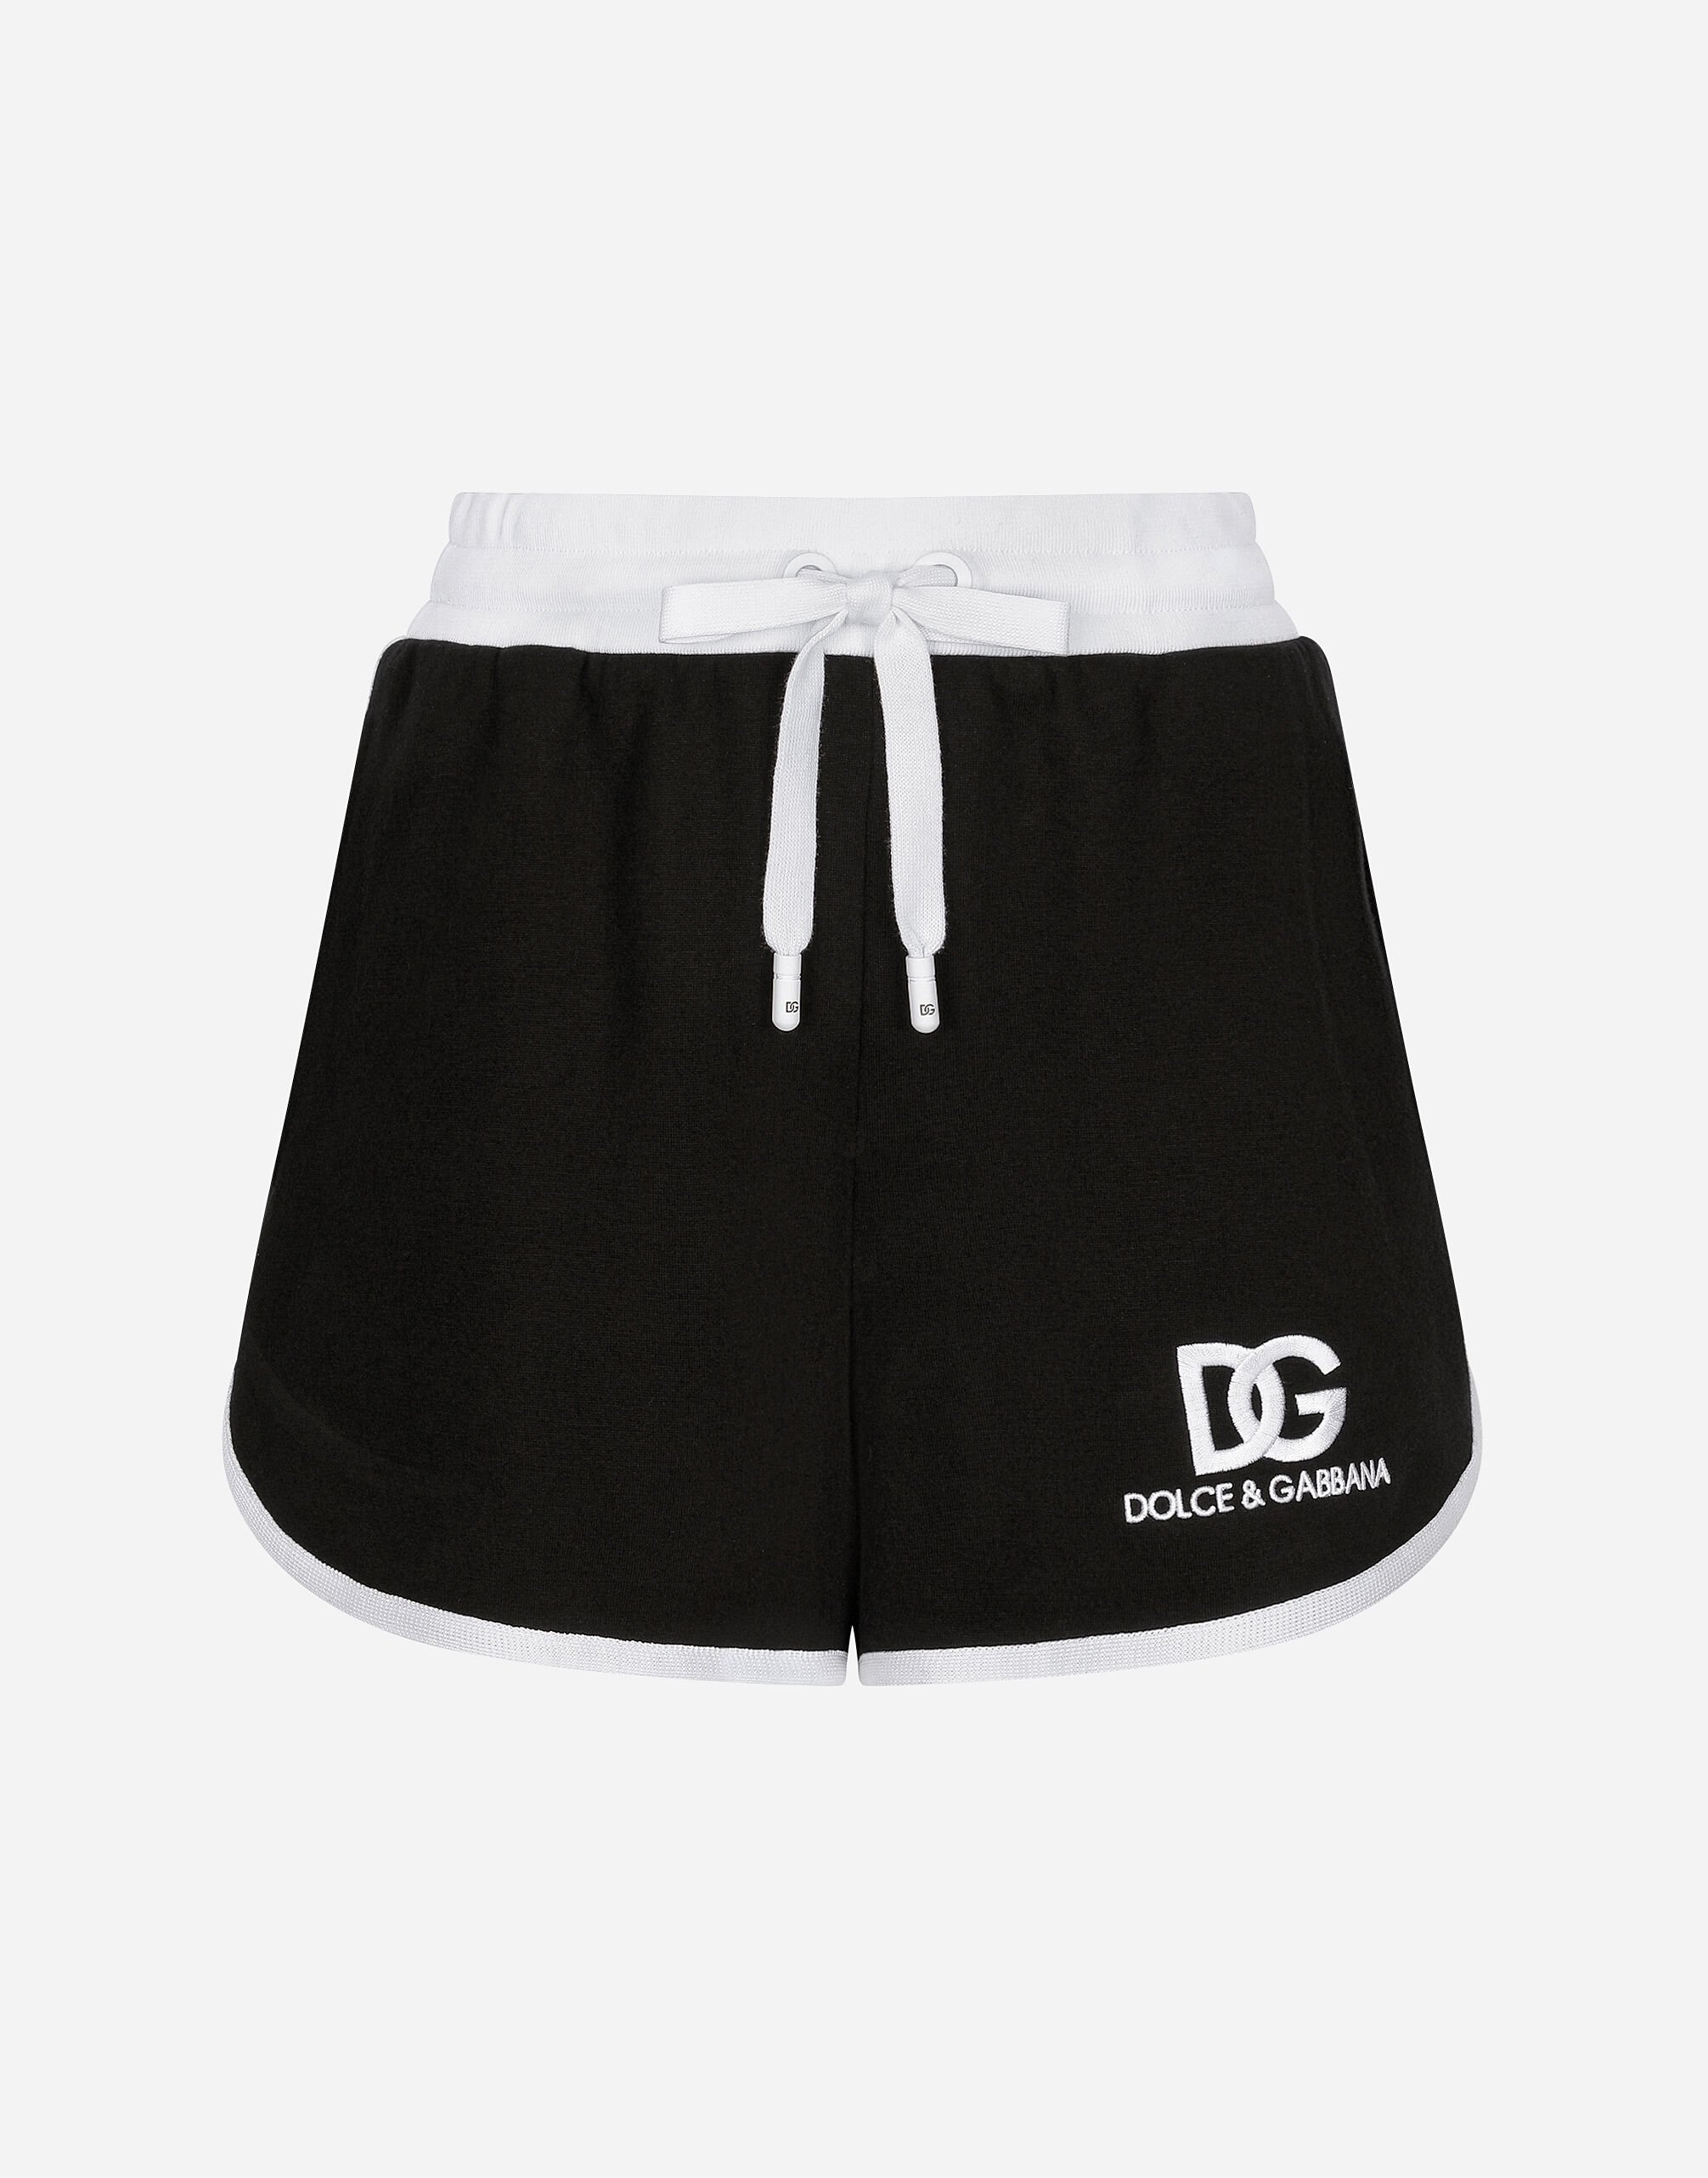 Dolce & Gabbana Jersey shorts with DG logo embroidery Print FTCJUTHS5NO